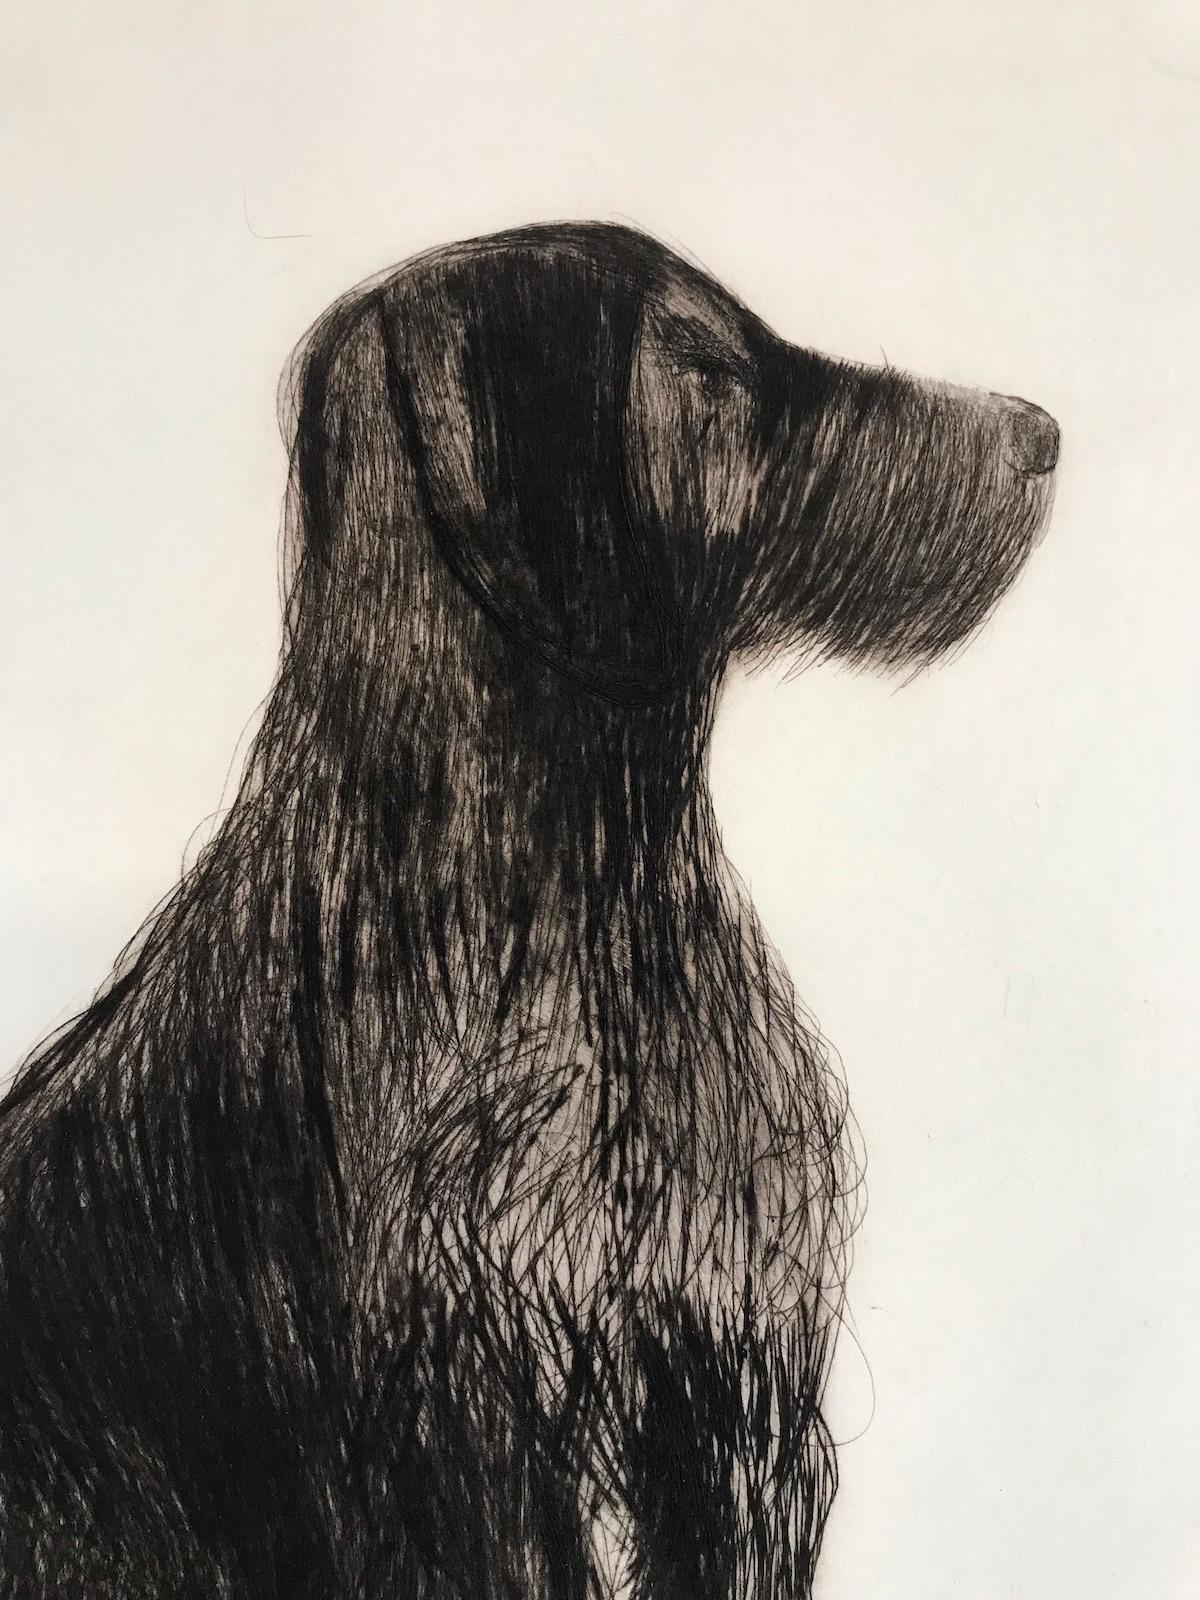 Stevie Sitting by Kate Boxer [2022]
Please note that insitu images are purely an indication of how a piece may look
Stevie Sitting is a handmade dry point print by artist Kate Boxer, featuring a wire haired dog sitting obediently. Kate Boxer, artist